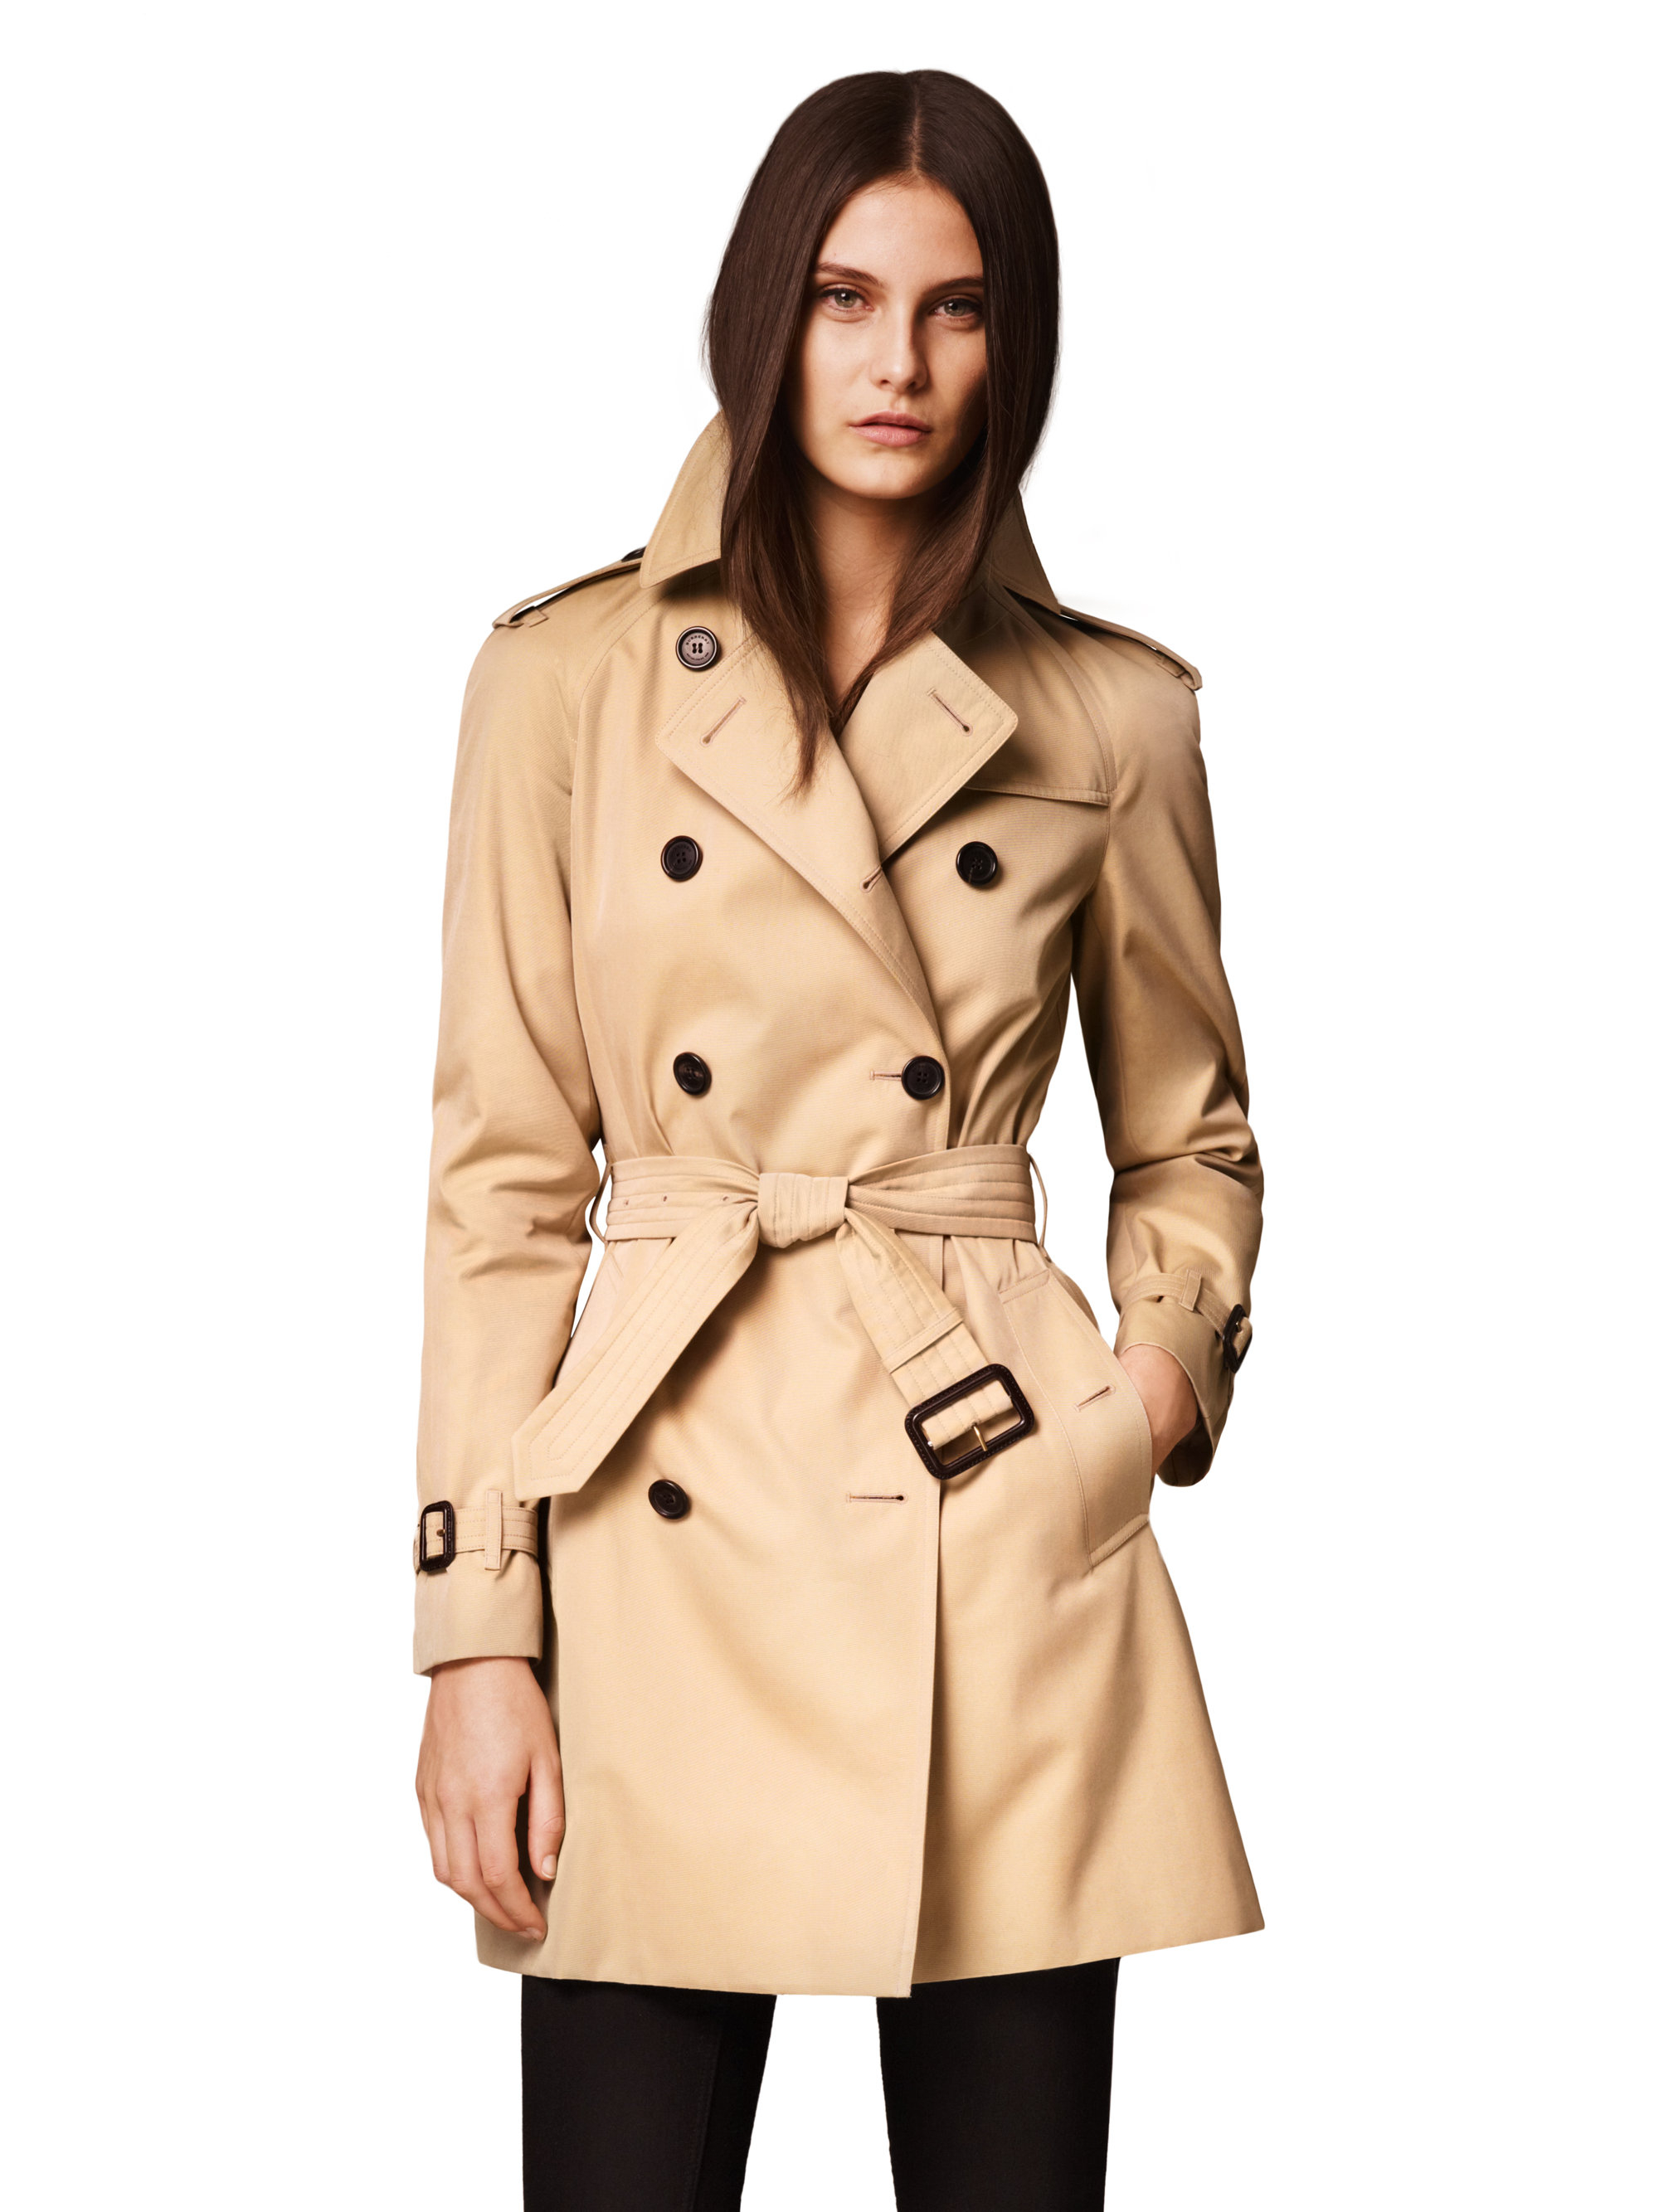 Lyst - Burberry Westminster Mid-length Heritage Trench Coat in Natural